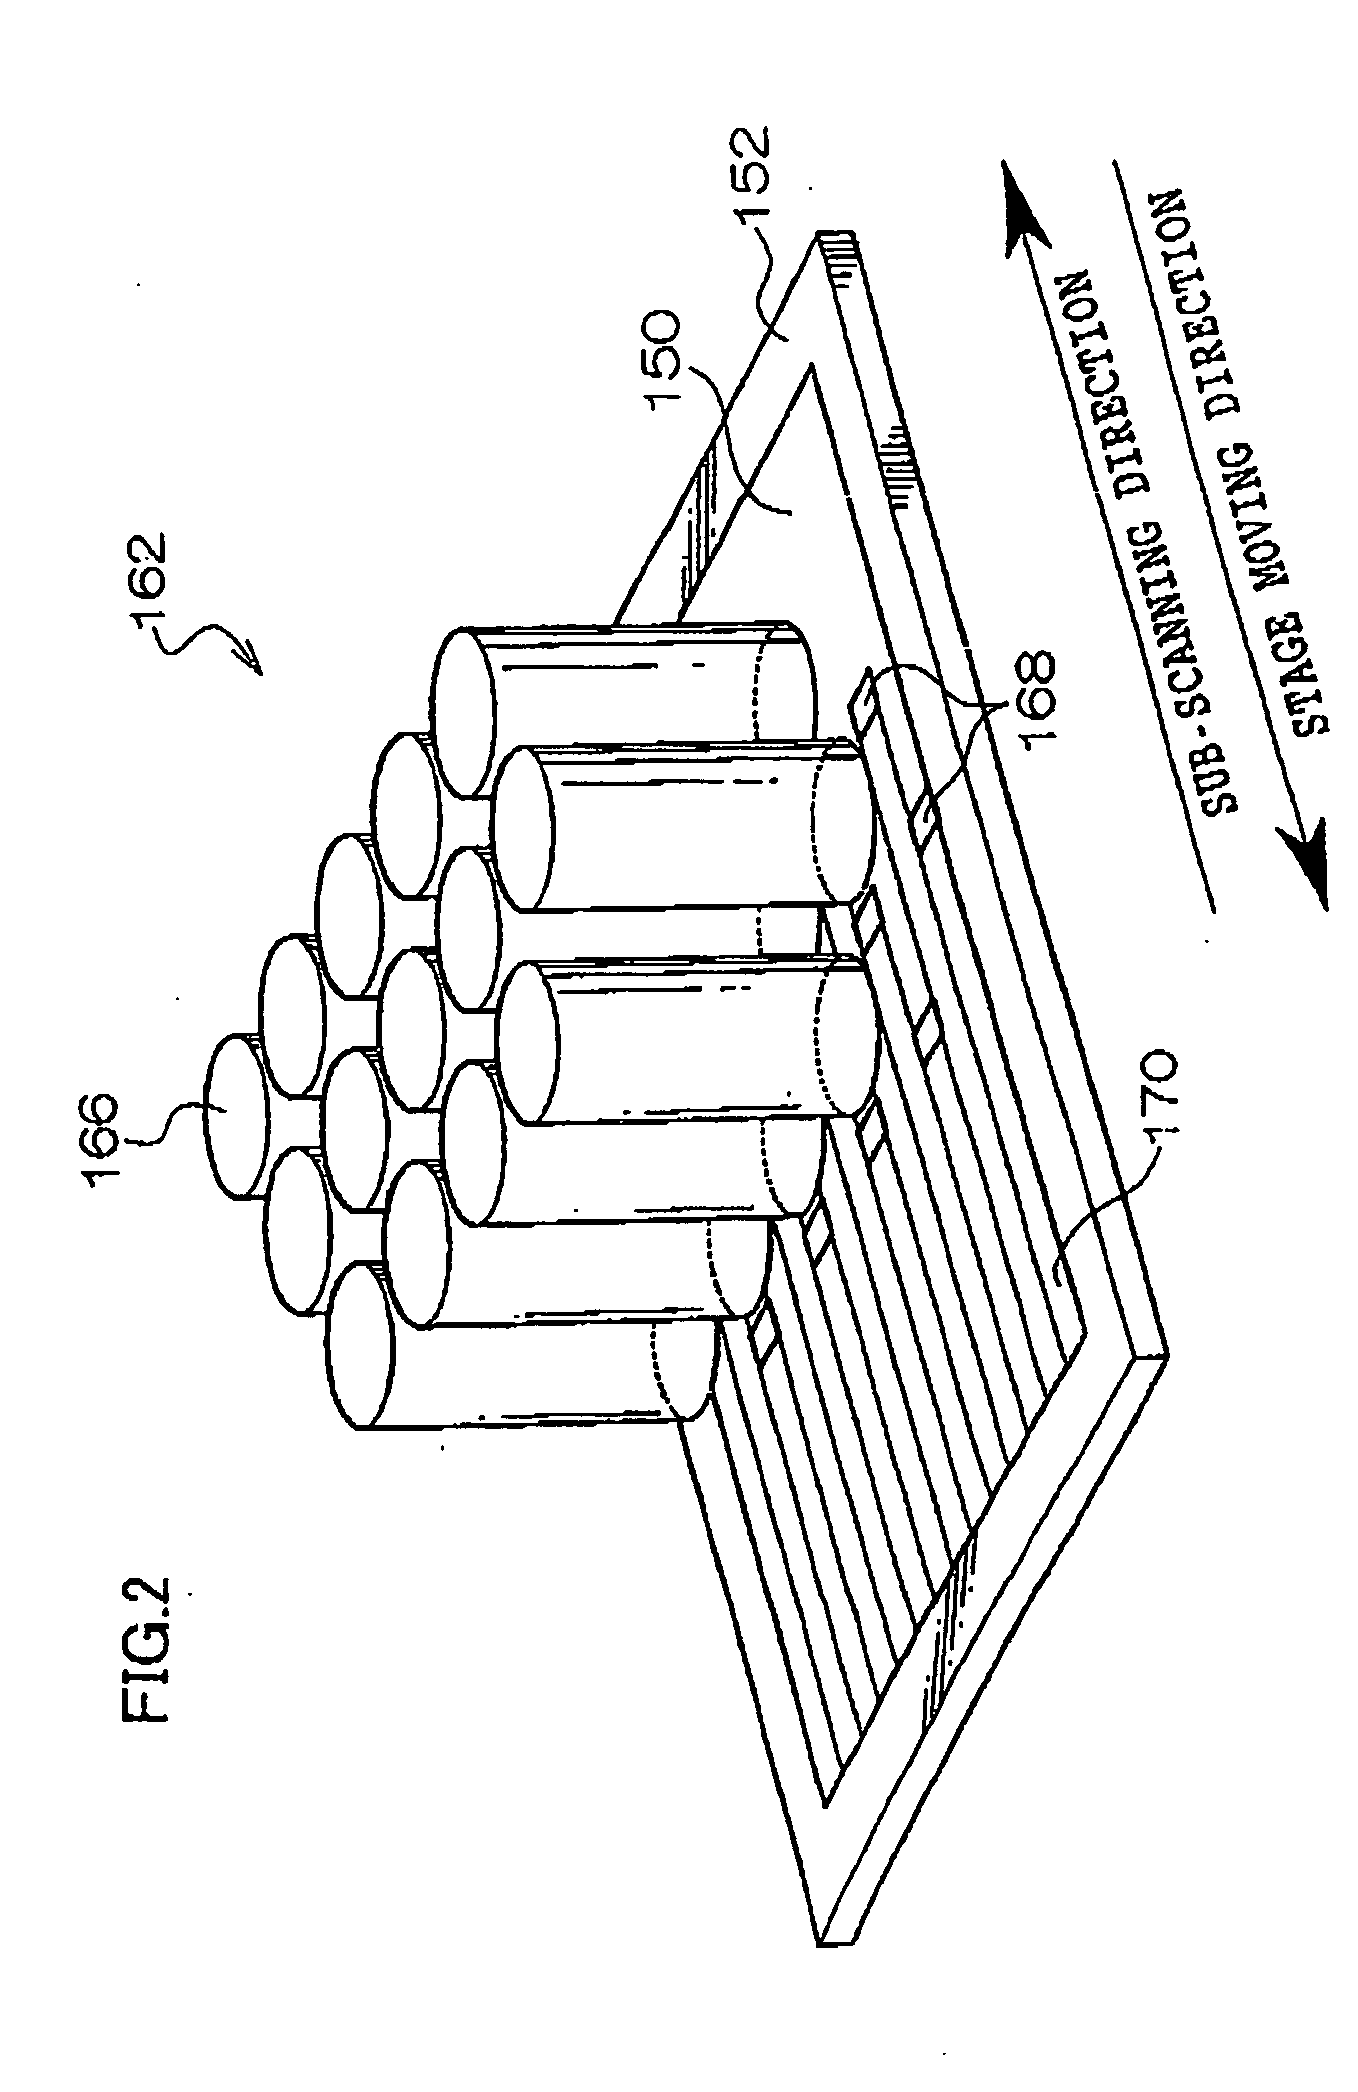 Exposure head, exposure apparatus, and application thereof